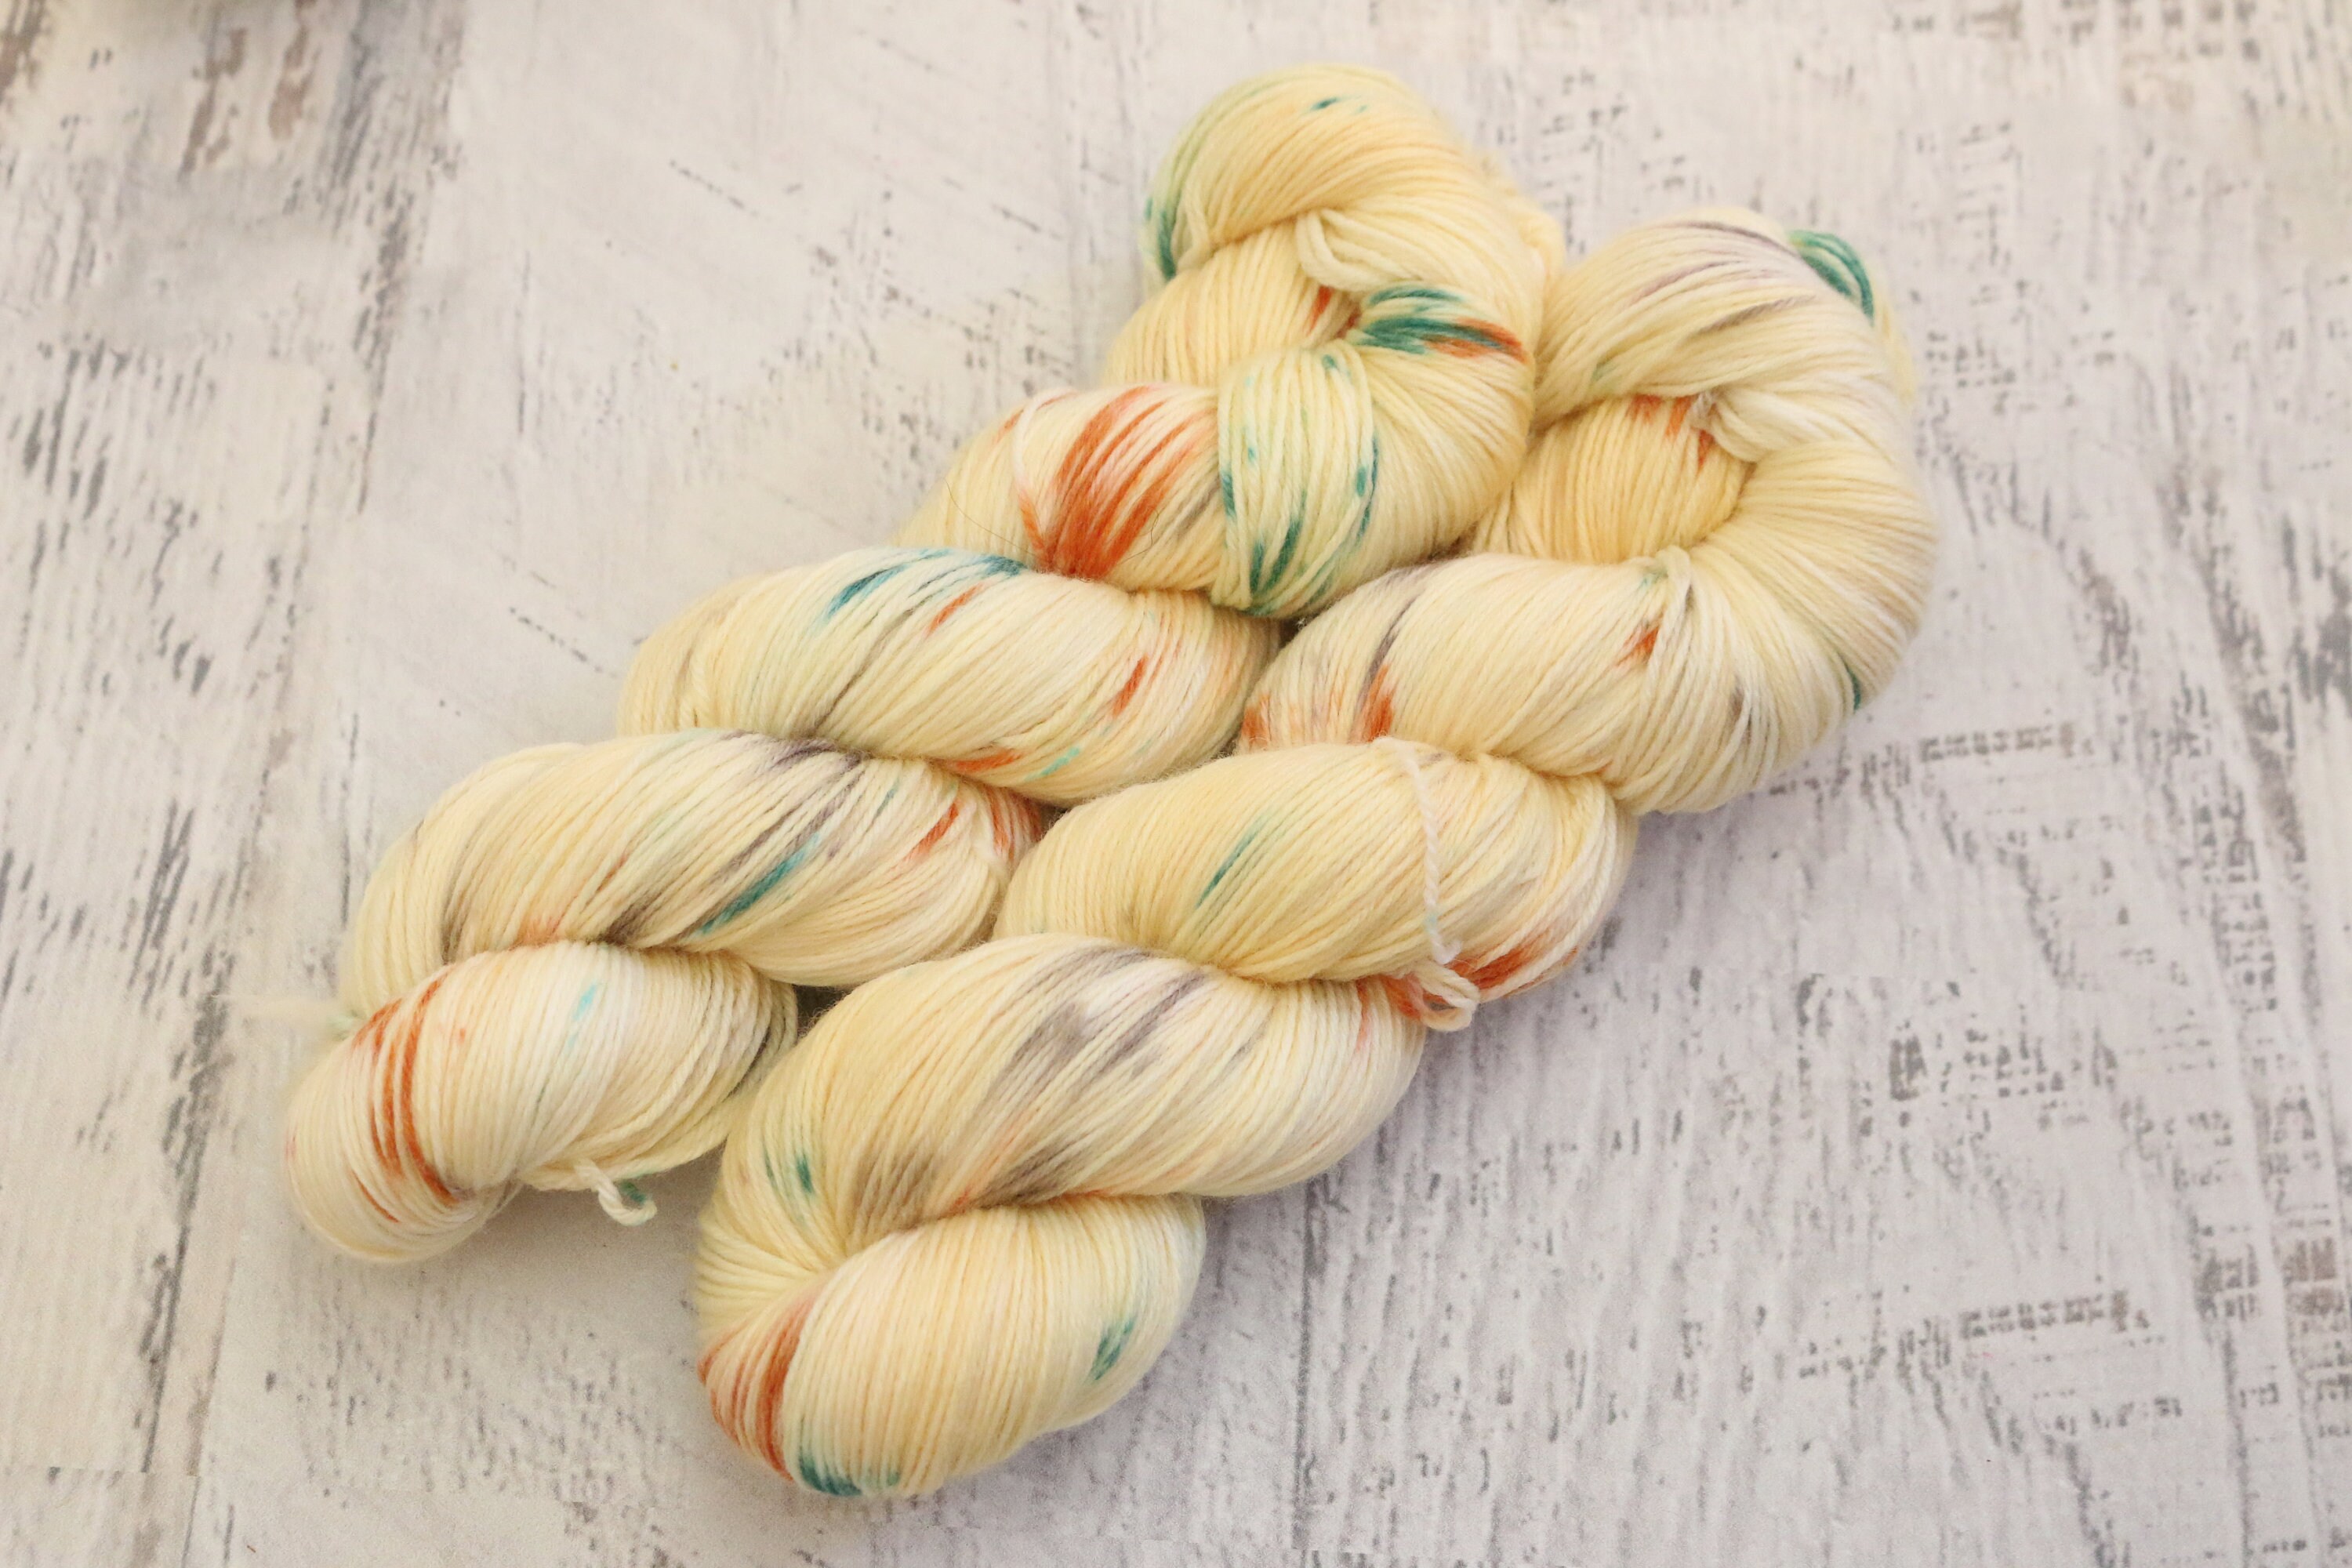 Speckled Worsted Weight Cotton Yarn 7525 Cotton/acrylic Hand Dyed